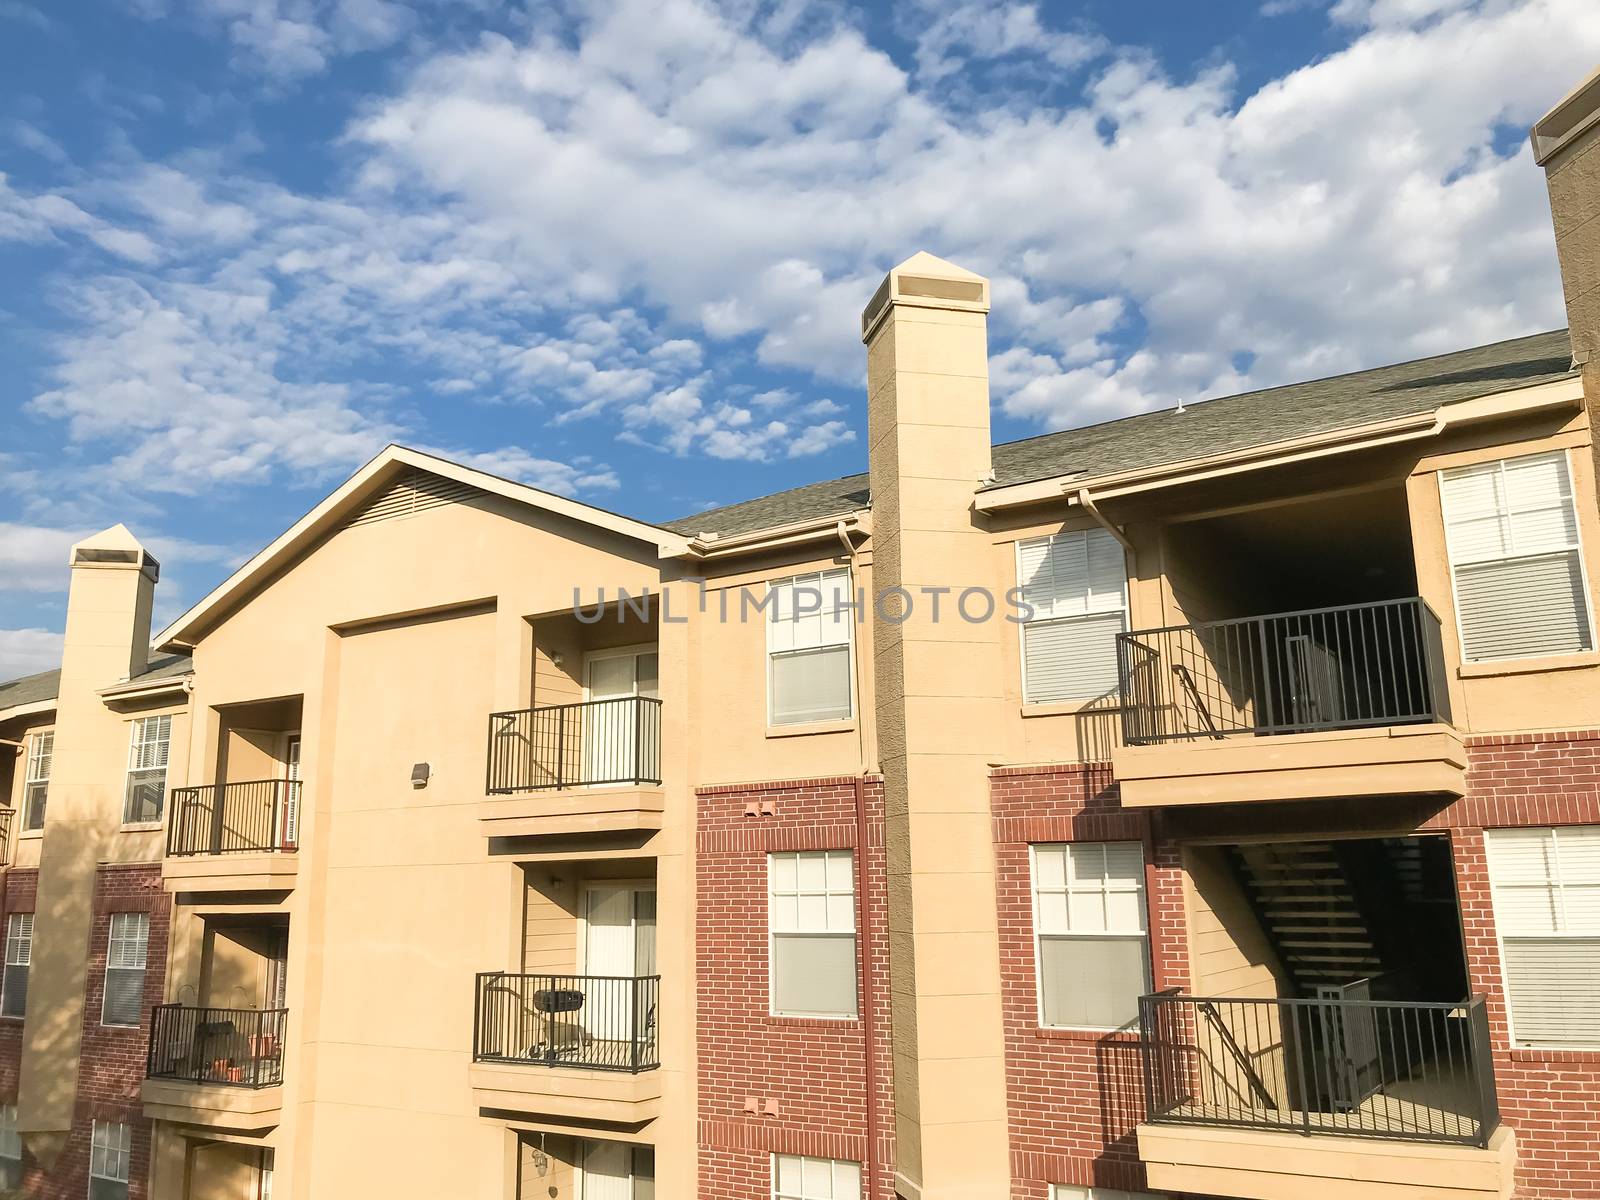 Apartment home building complex in suburban Dallas, Texas, USA. Low angle view of multi-stories rental real estate at sunset with cloud sky